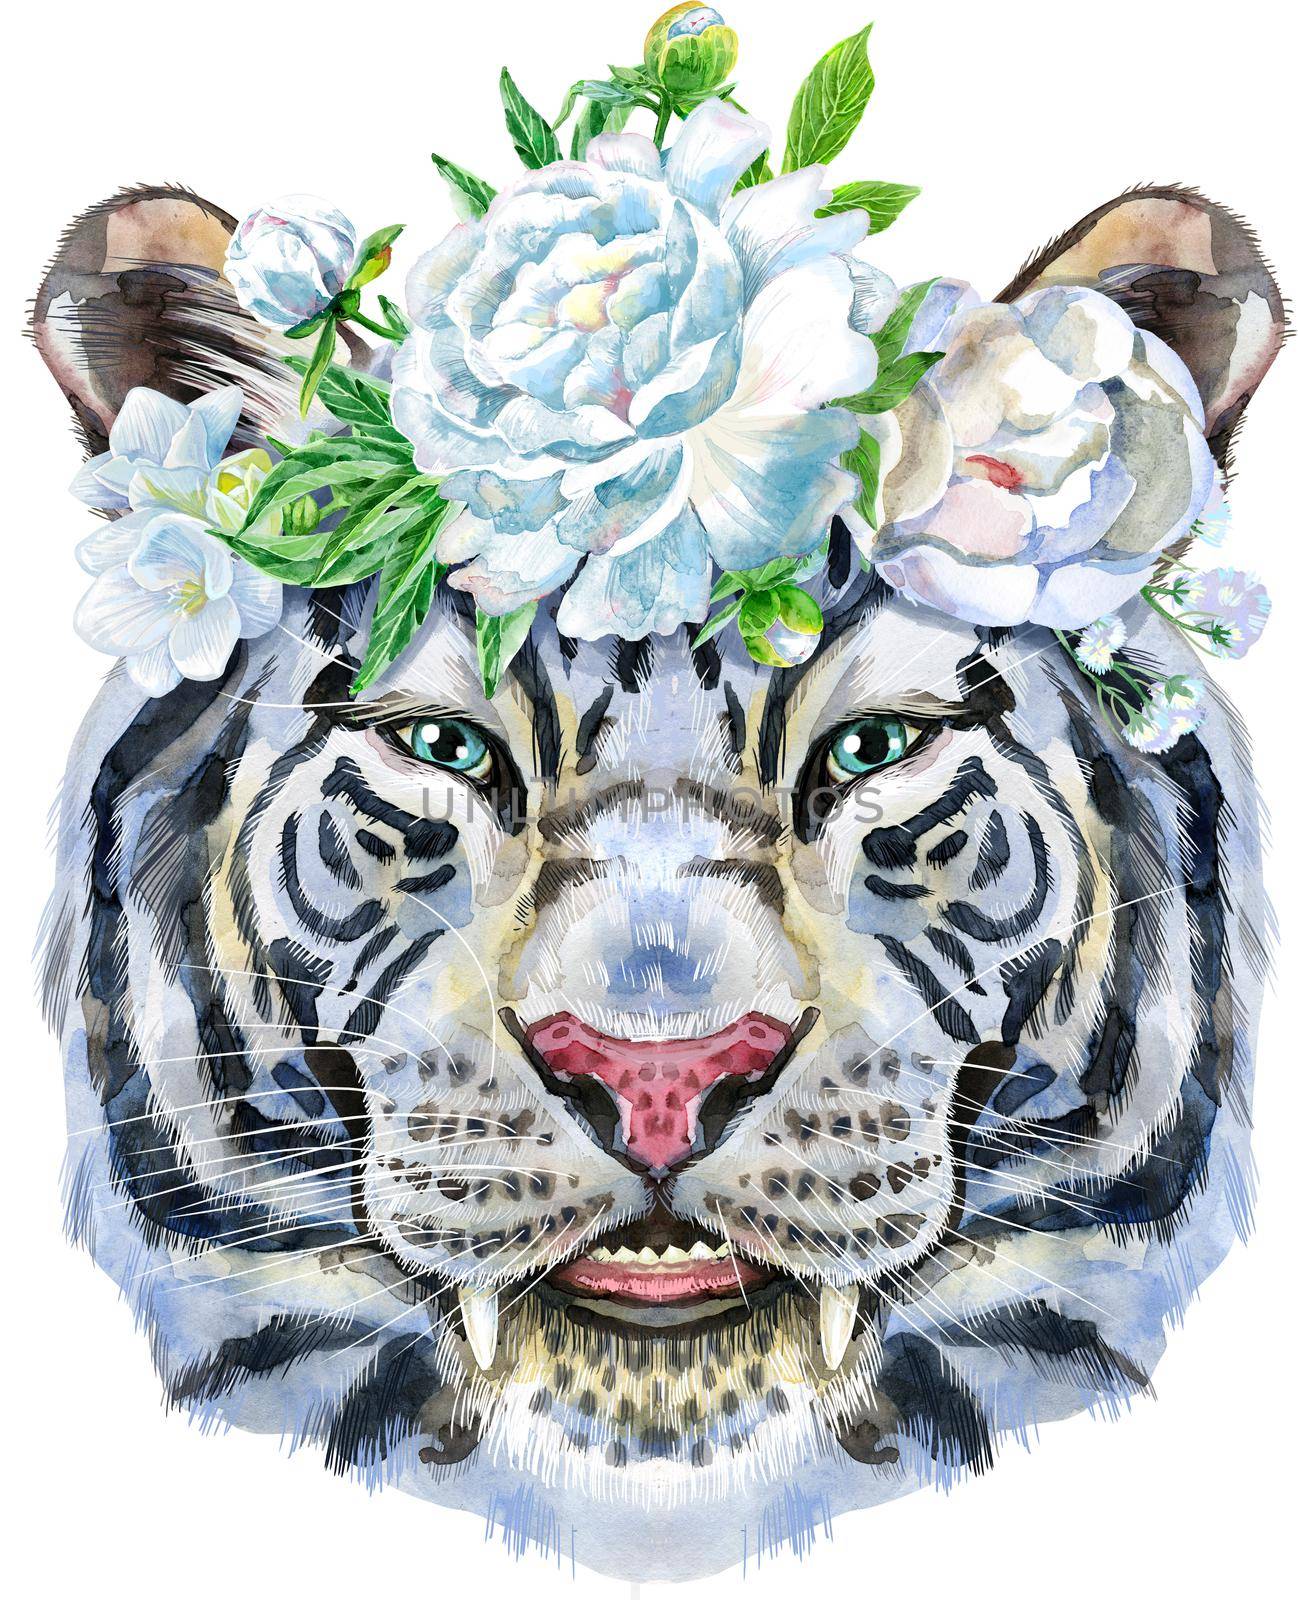 Colorful white tiger in a wreath of white flowers. Wild animal watercolor illustration on white background by NataOmsk